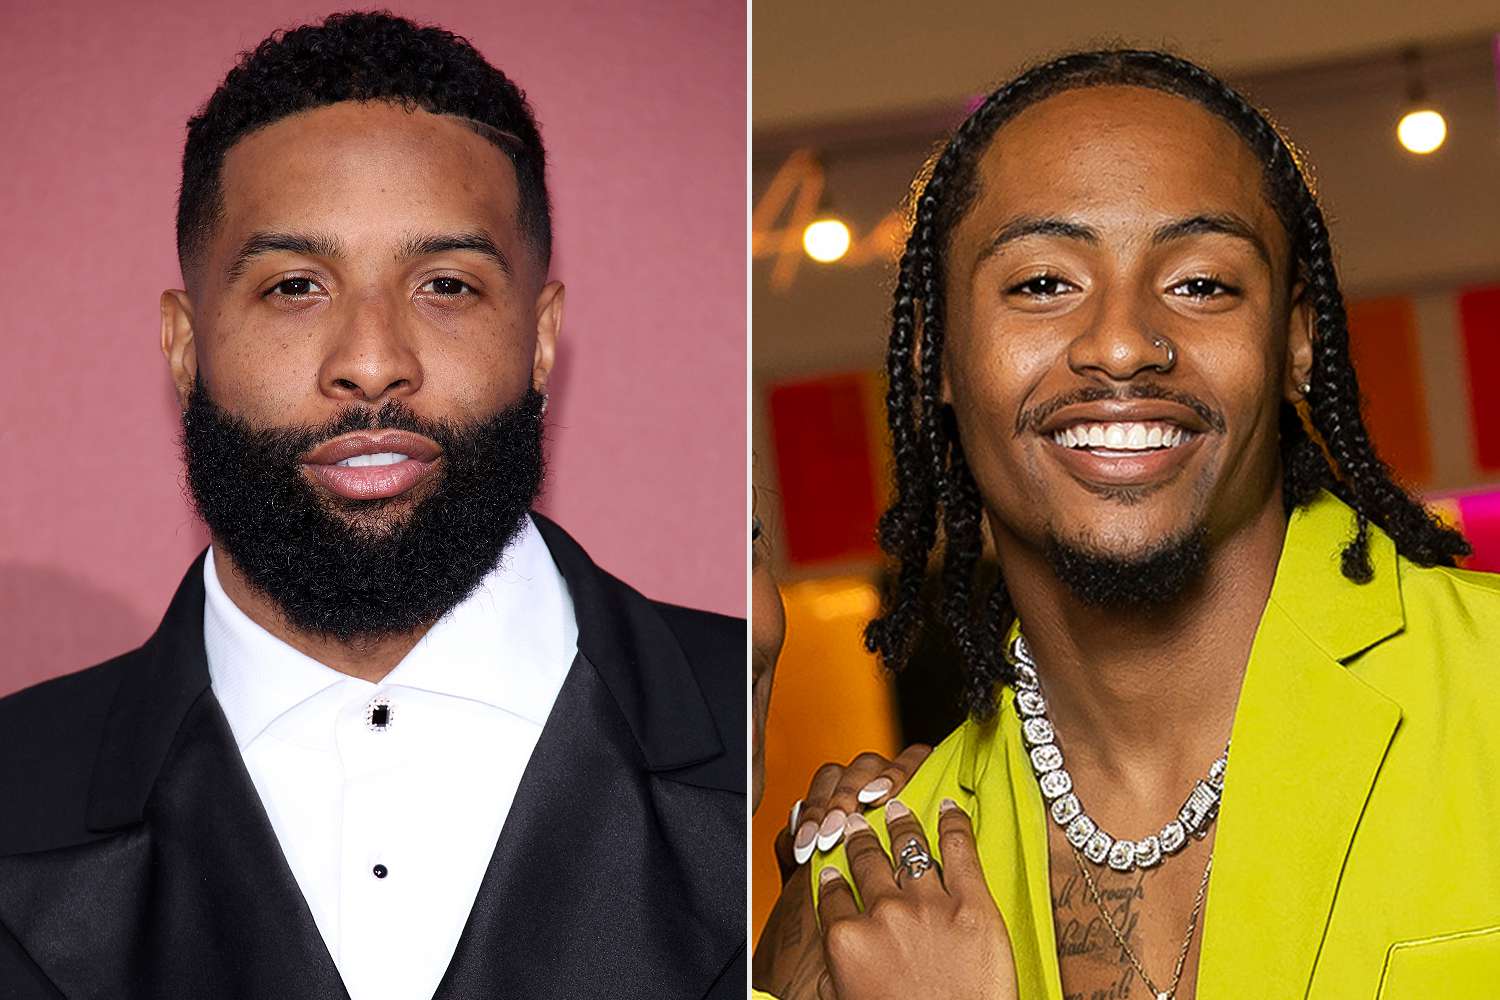 Odell Beckham Jr. Meets Brother Kordell’s Partner Serena on 'Love Island USA': 'I'm Just So Happy for Y'all'